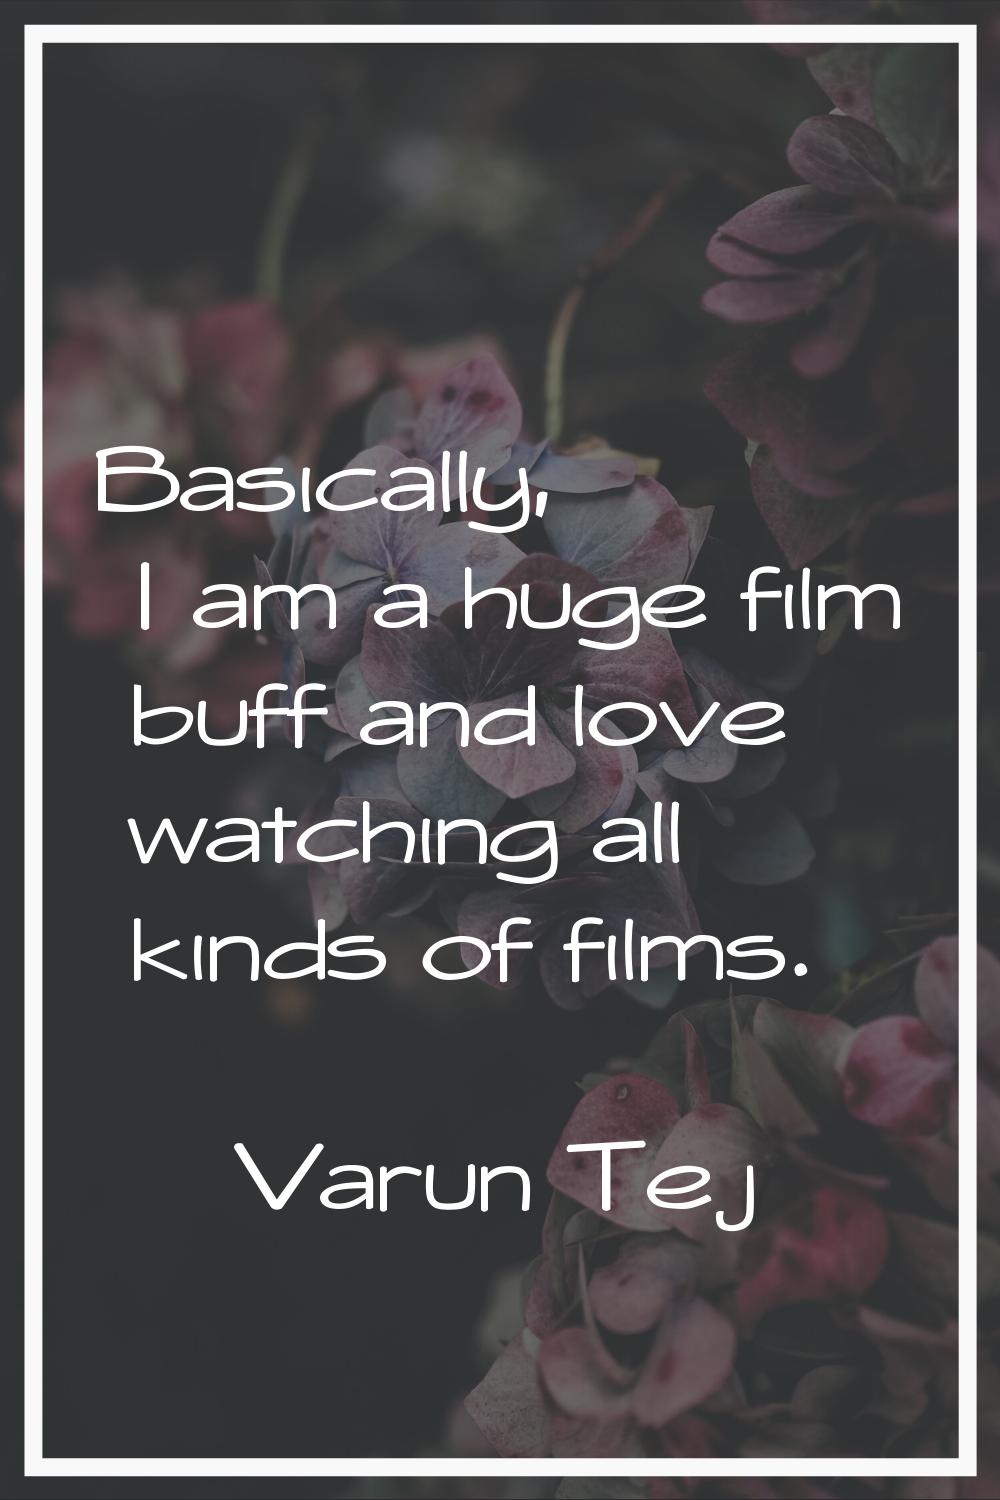 Basically, I am a huge film buff and love watching all kinds of films.